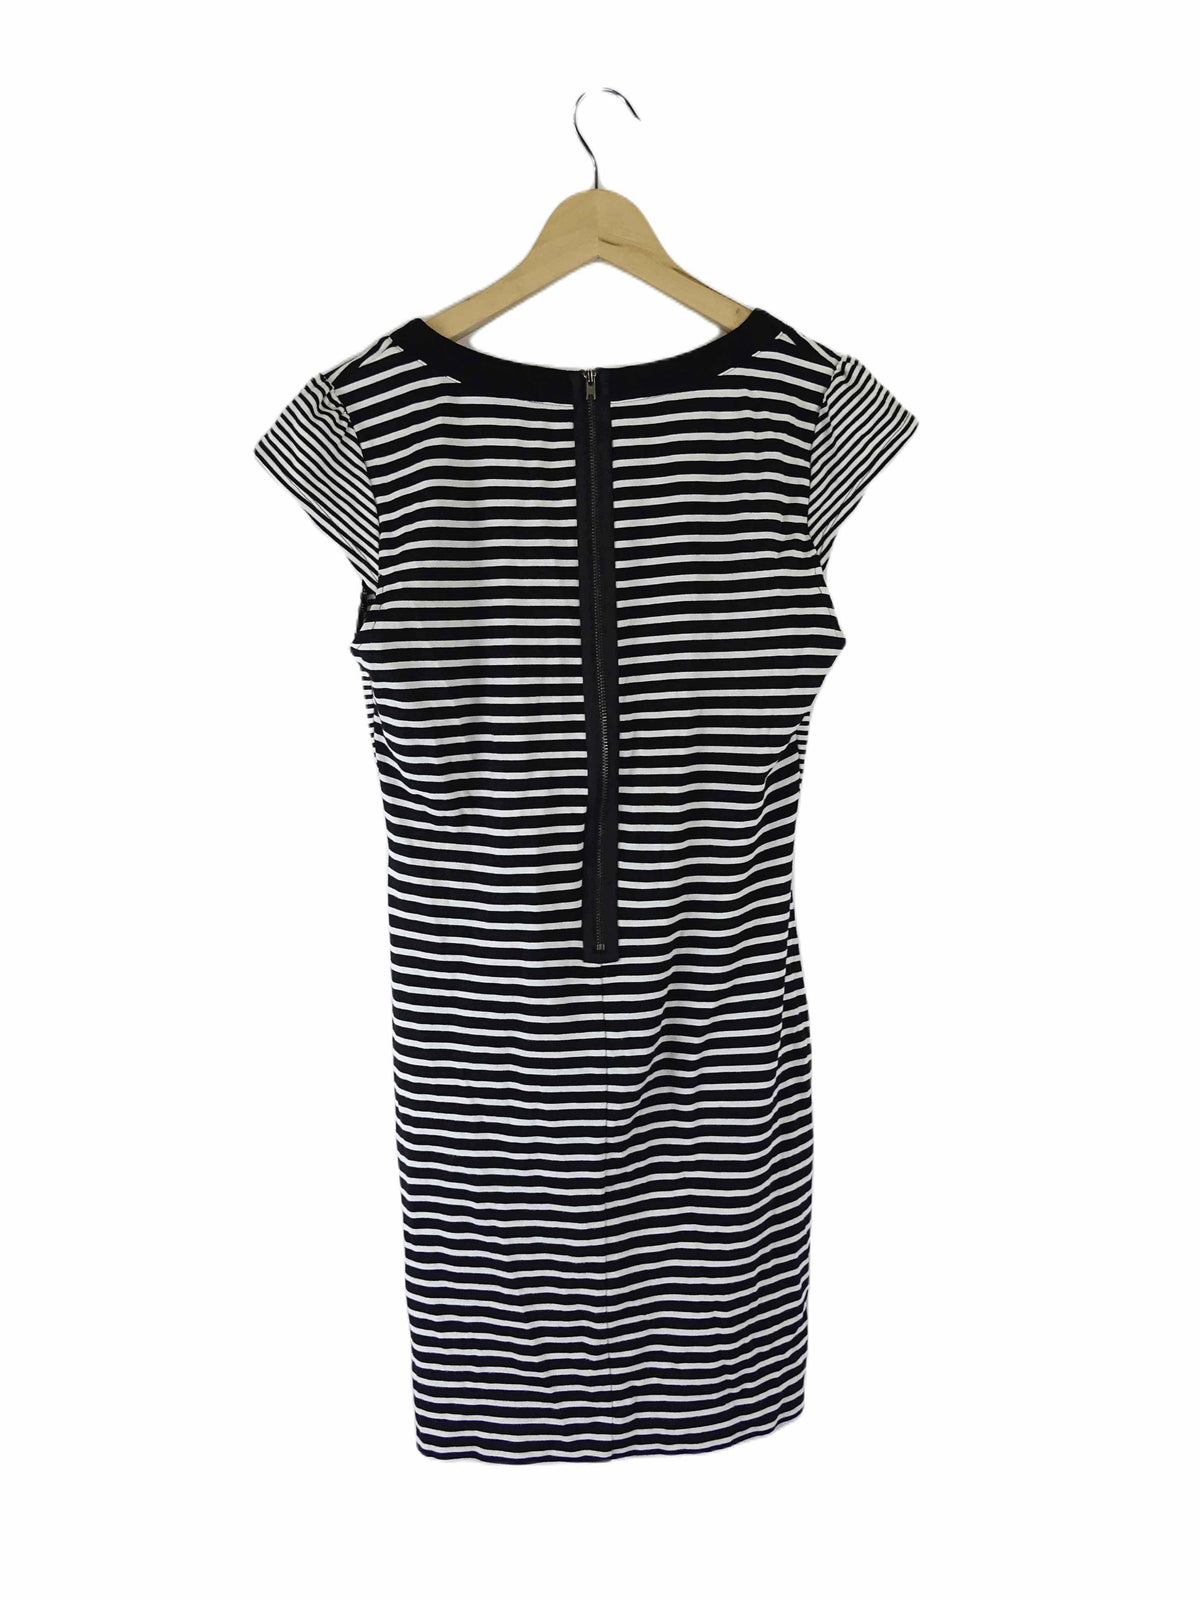 French Connection Black And White Striped Dress 12